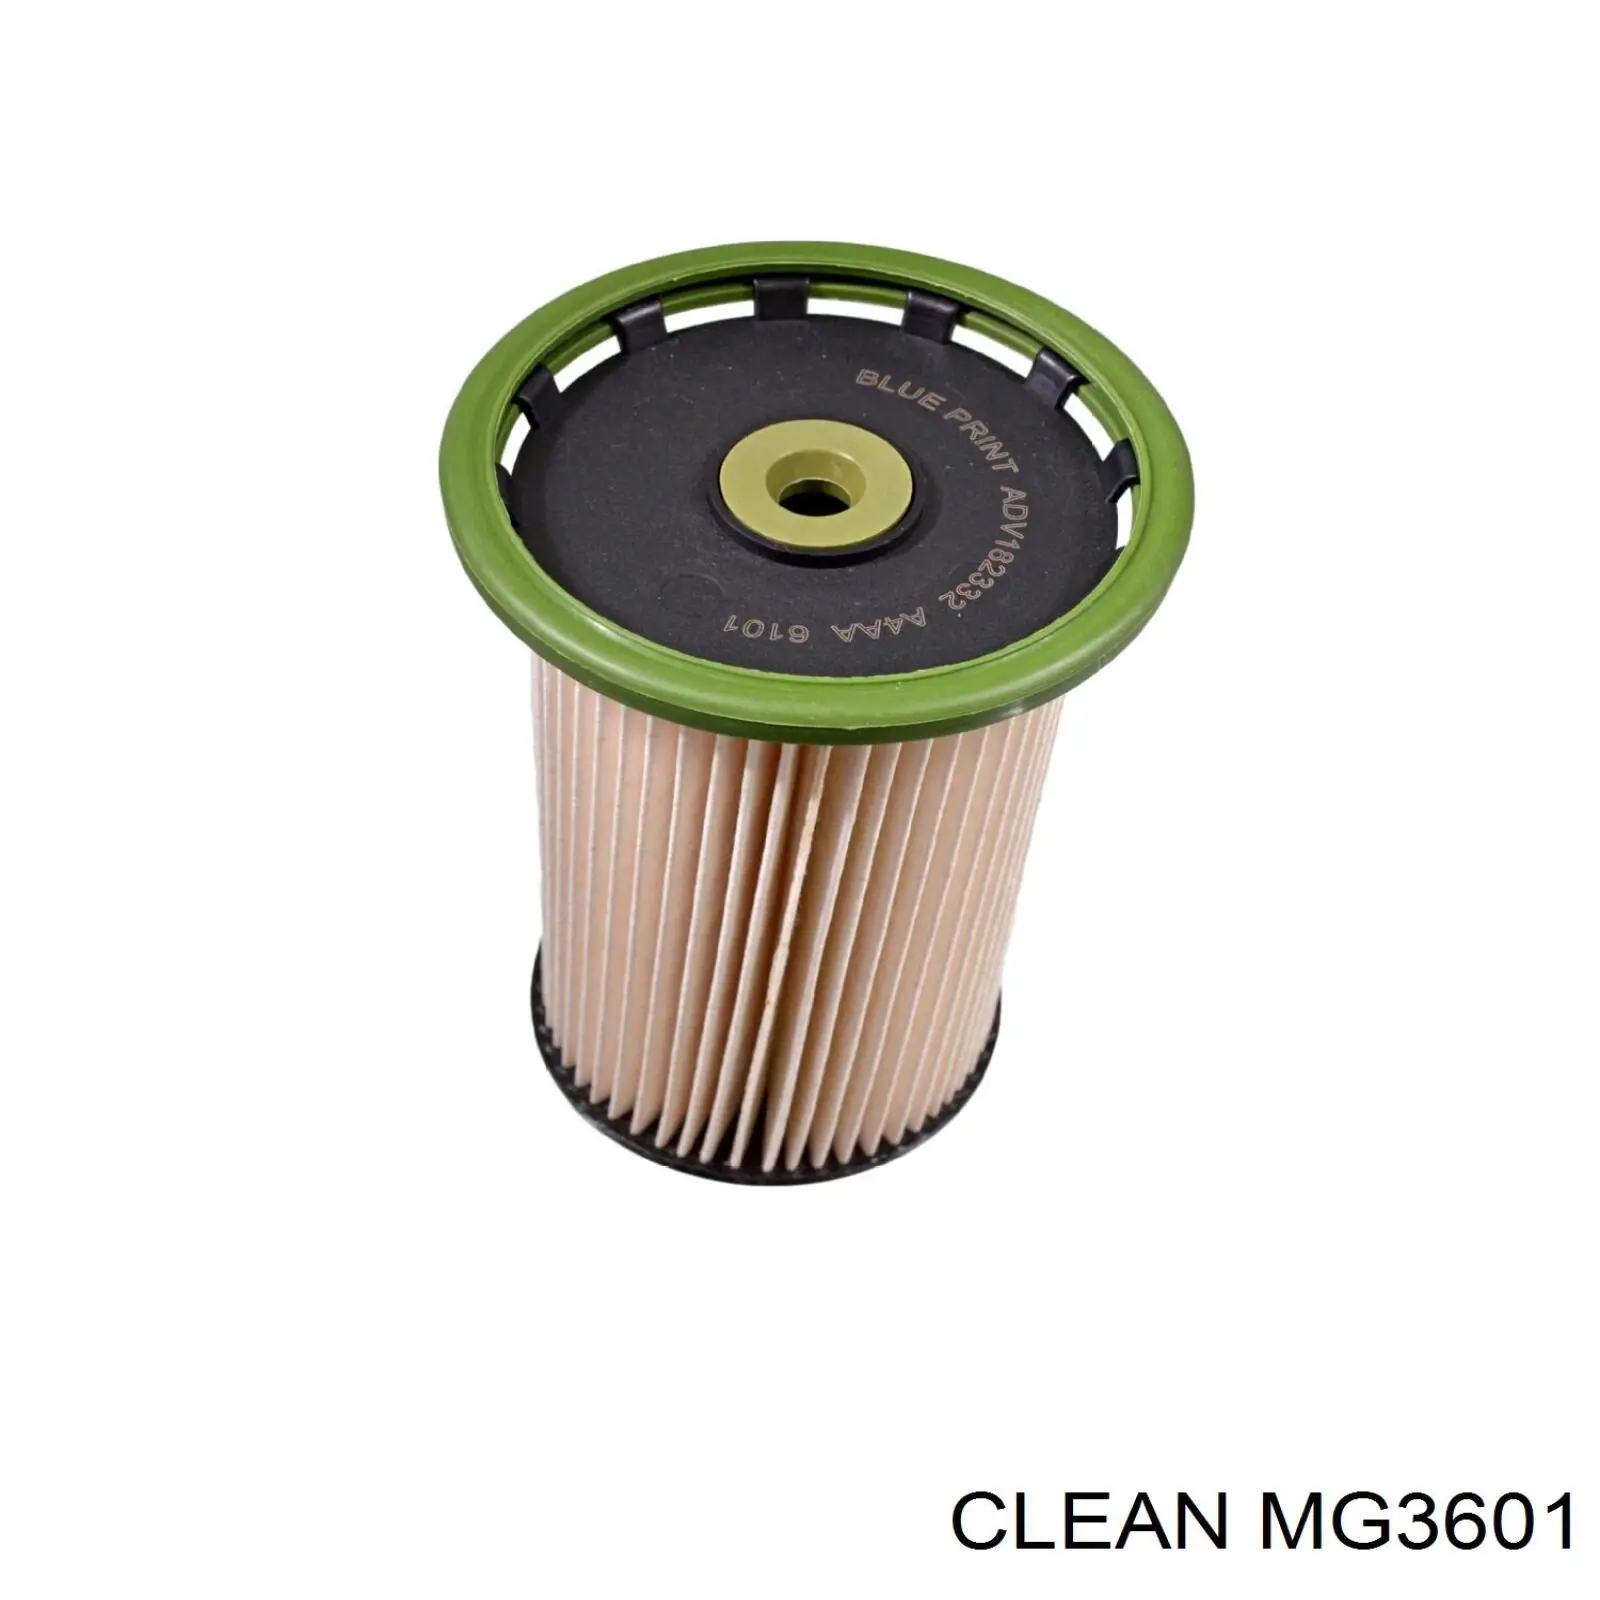 MG3601 Clean filtro combustible